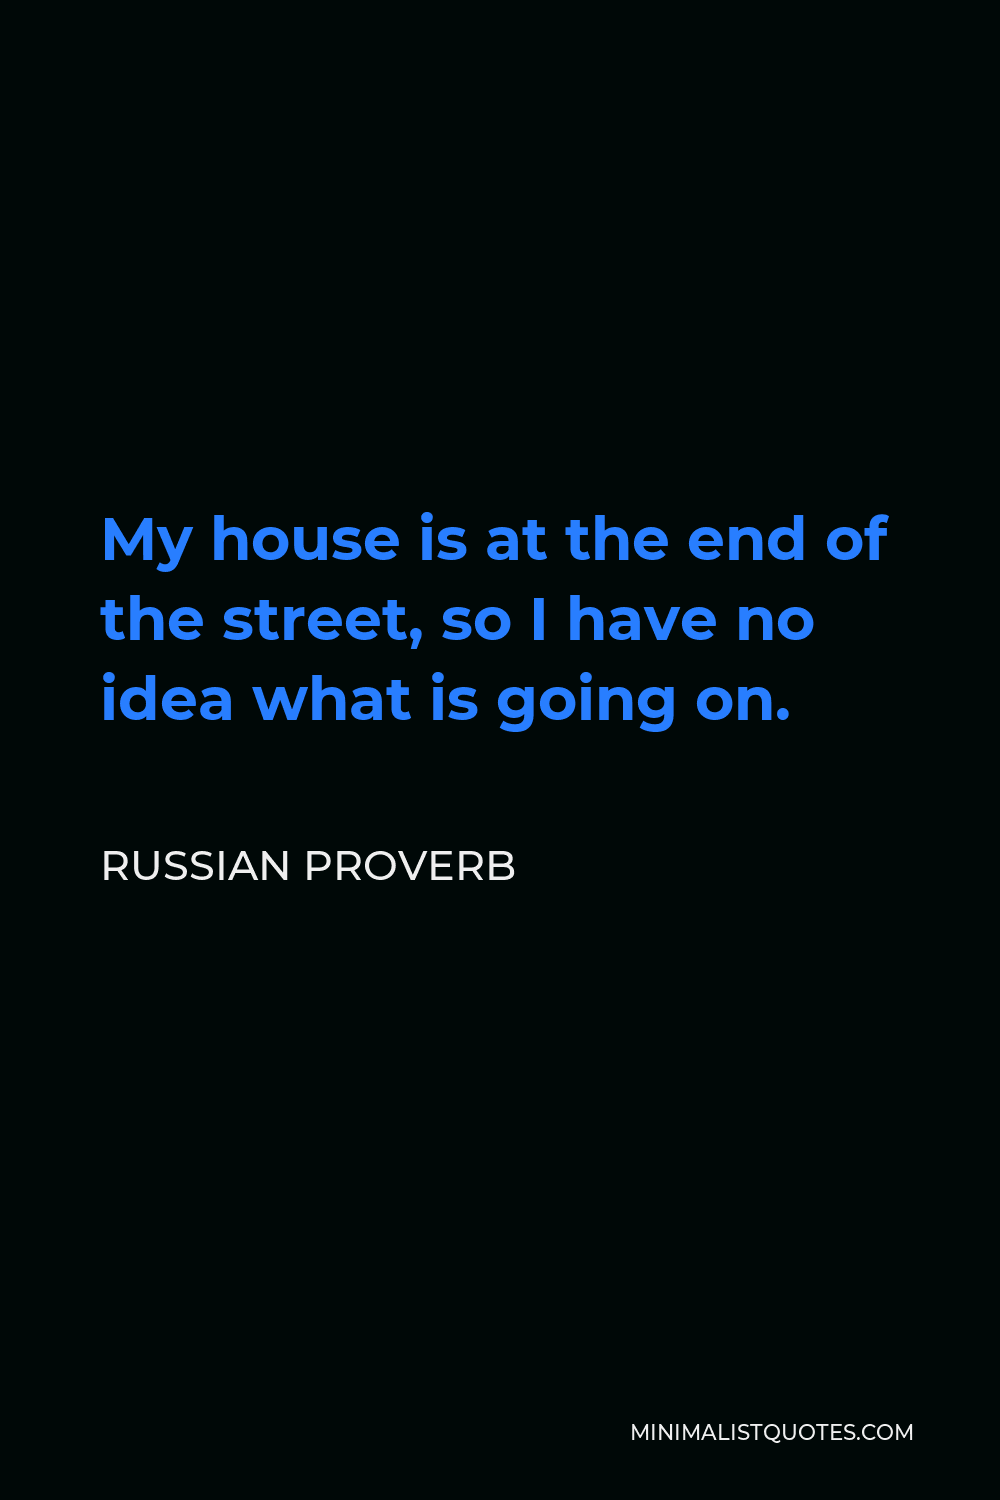 Russian Proverb Quote - My house is at the end of the street, so I have no idea what is going on.